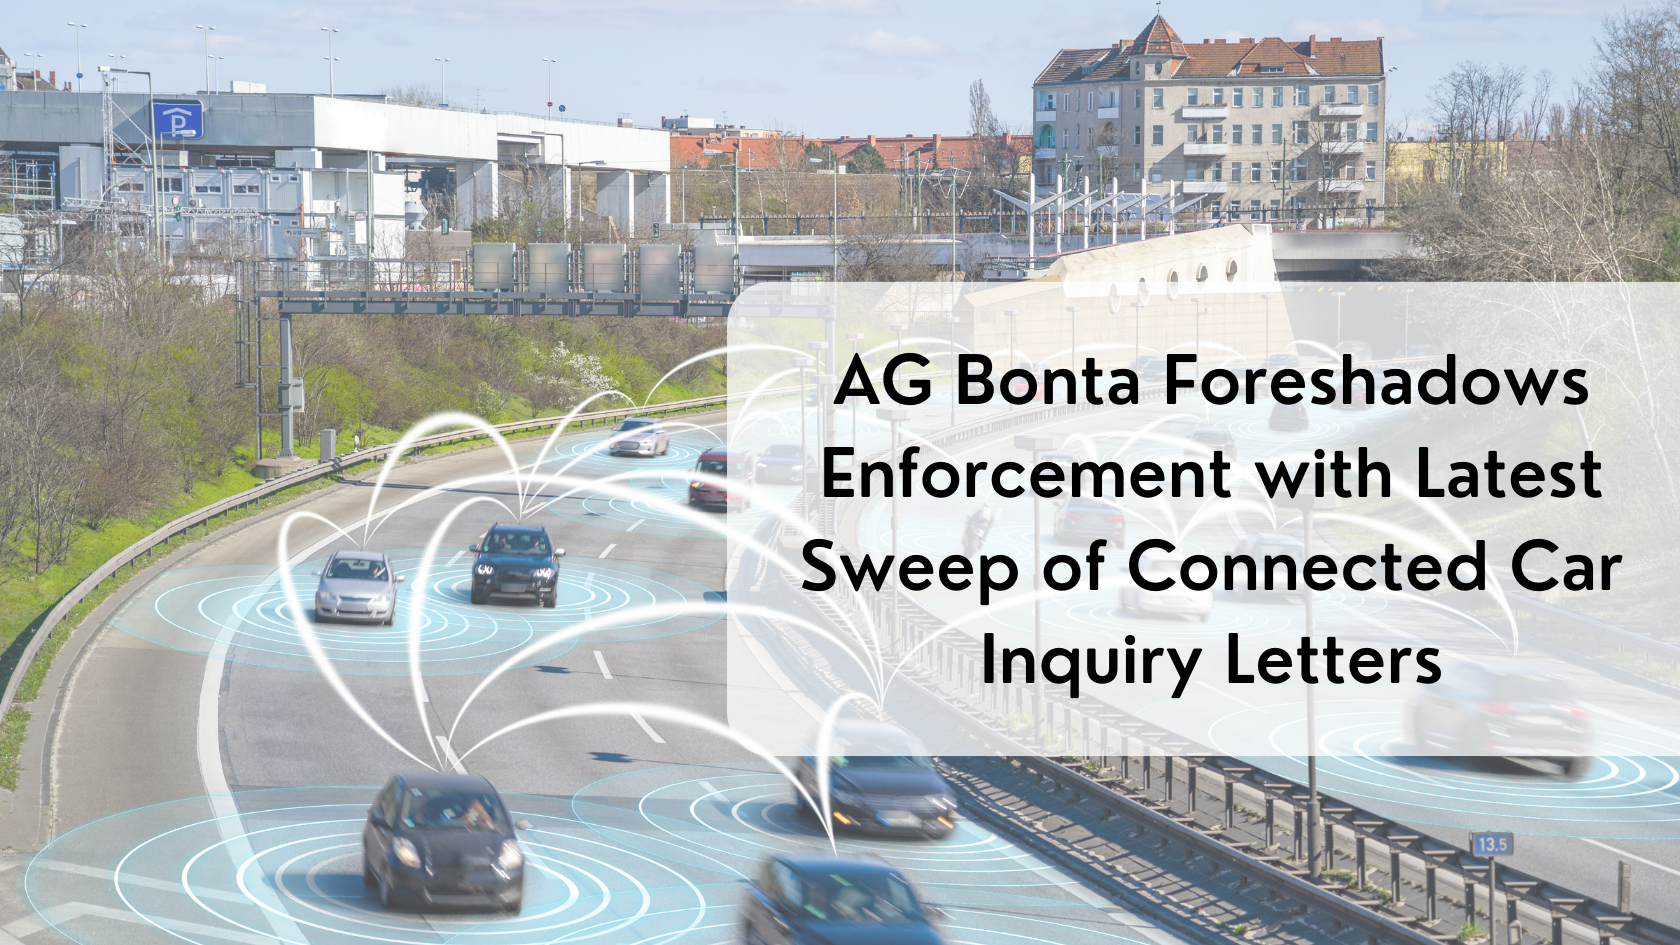 AG Bonta Foreshadows Future Enforcement with Latest Sweep of Connected Car Inquiry Letters